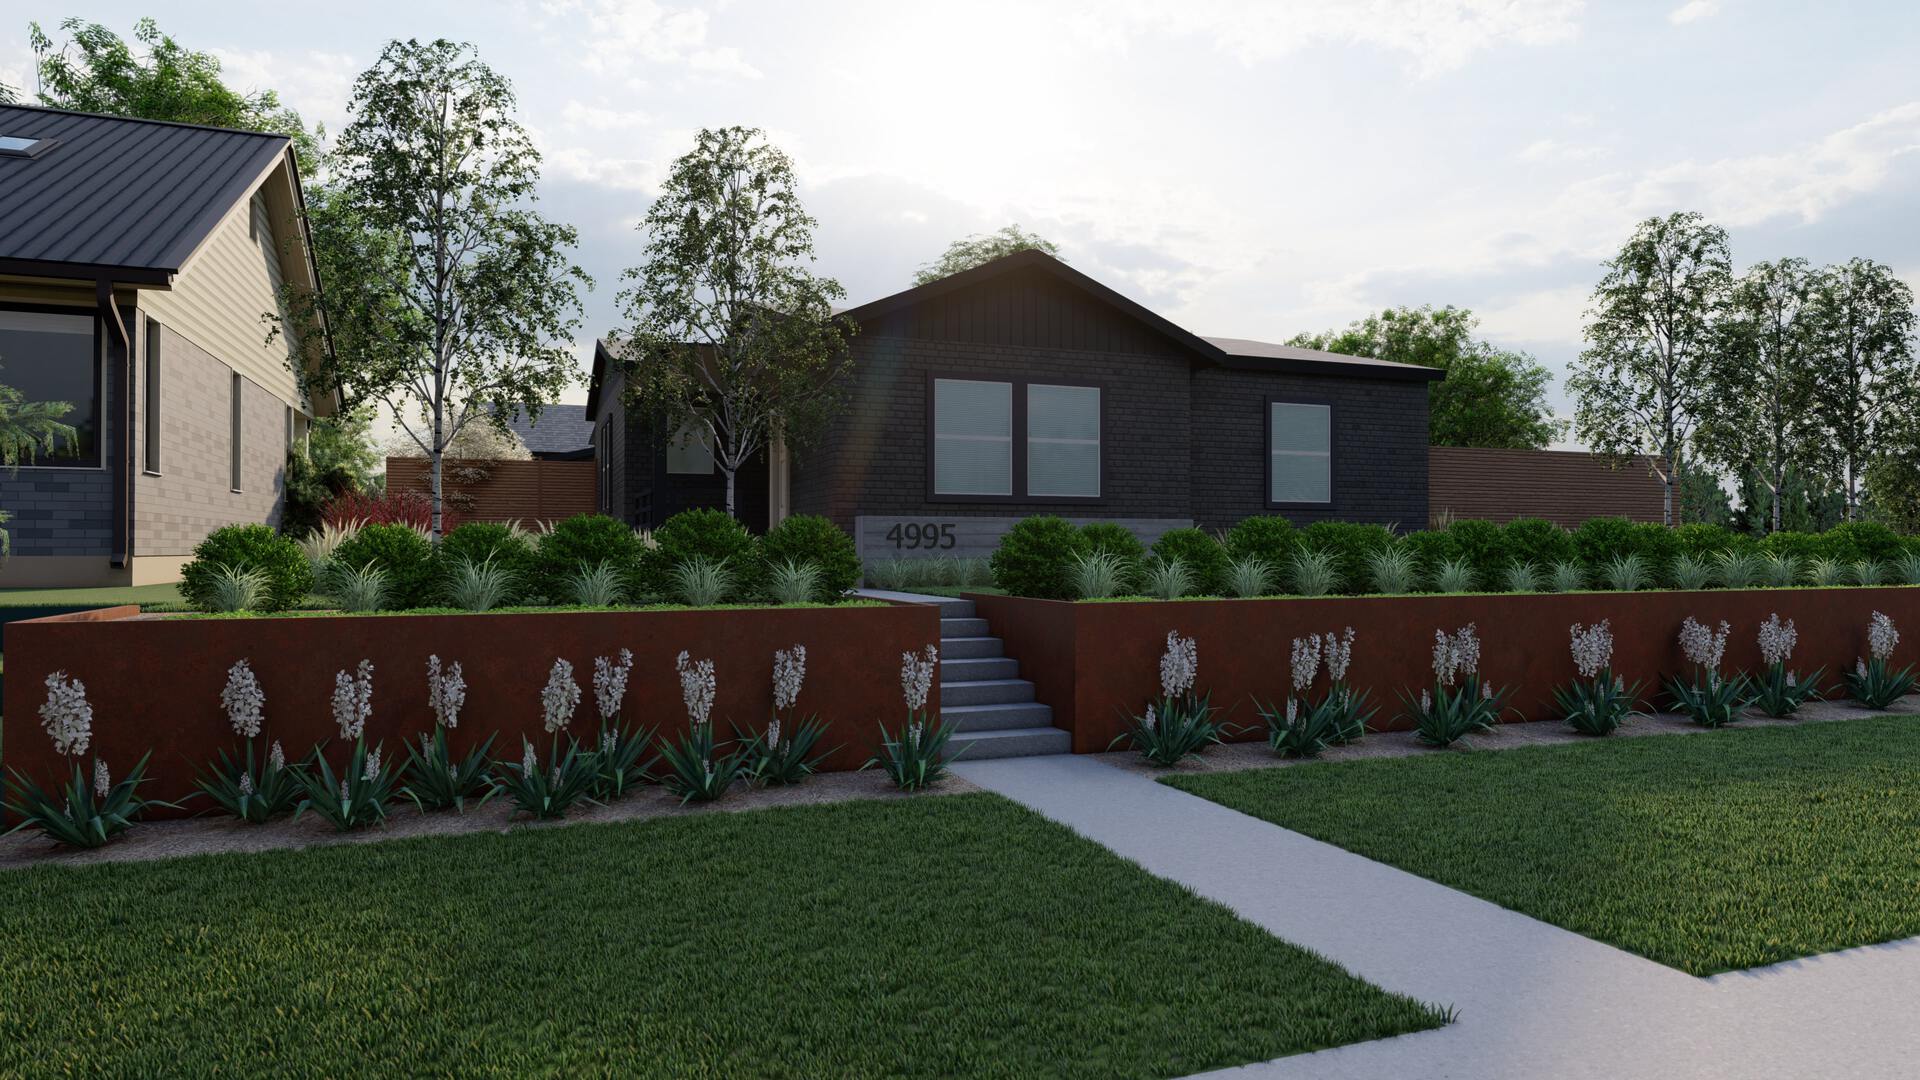 curb appeal front yard landscaping ideas in denver with a retaining wall to level out two grassy areas and shrubs and grasses for a naturalistic look for a ranch home.